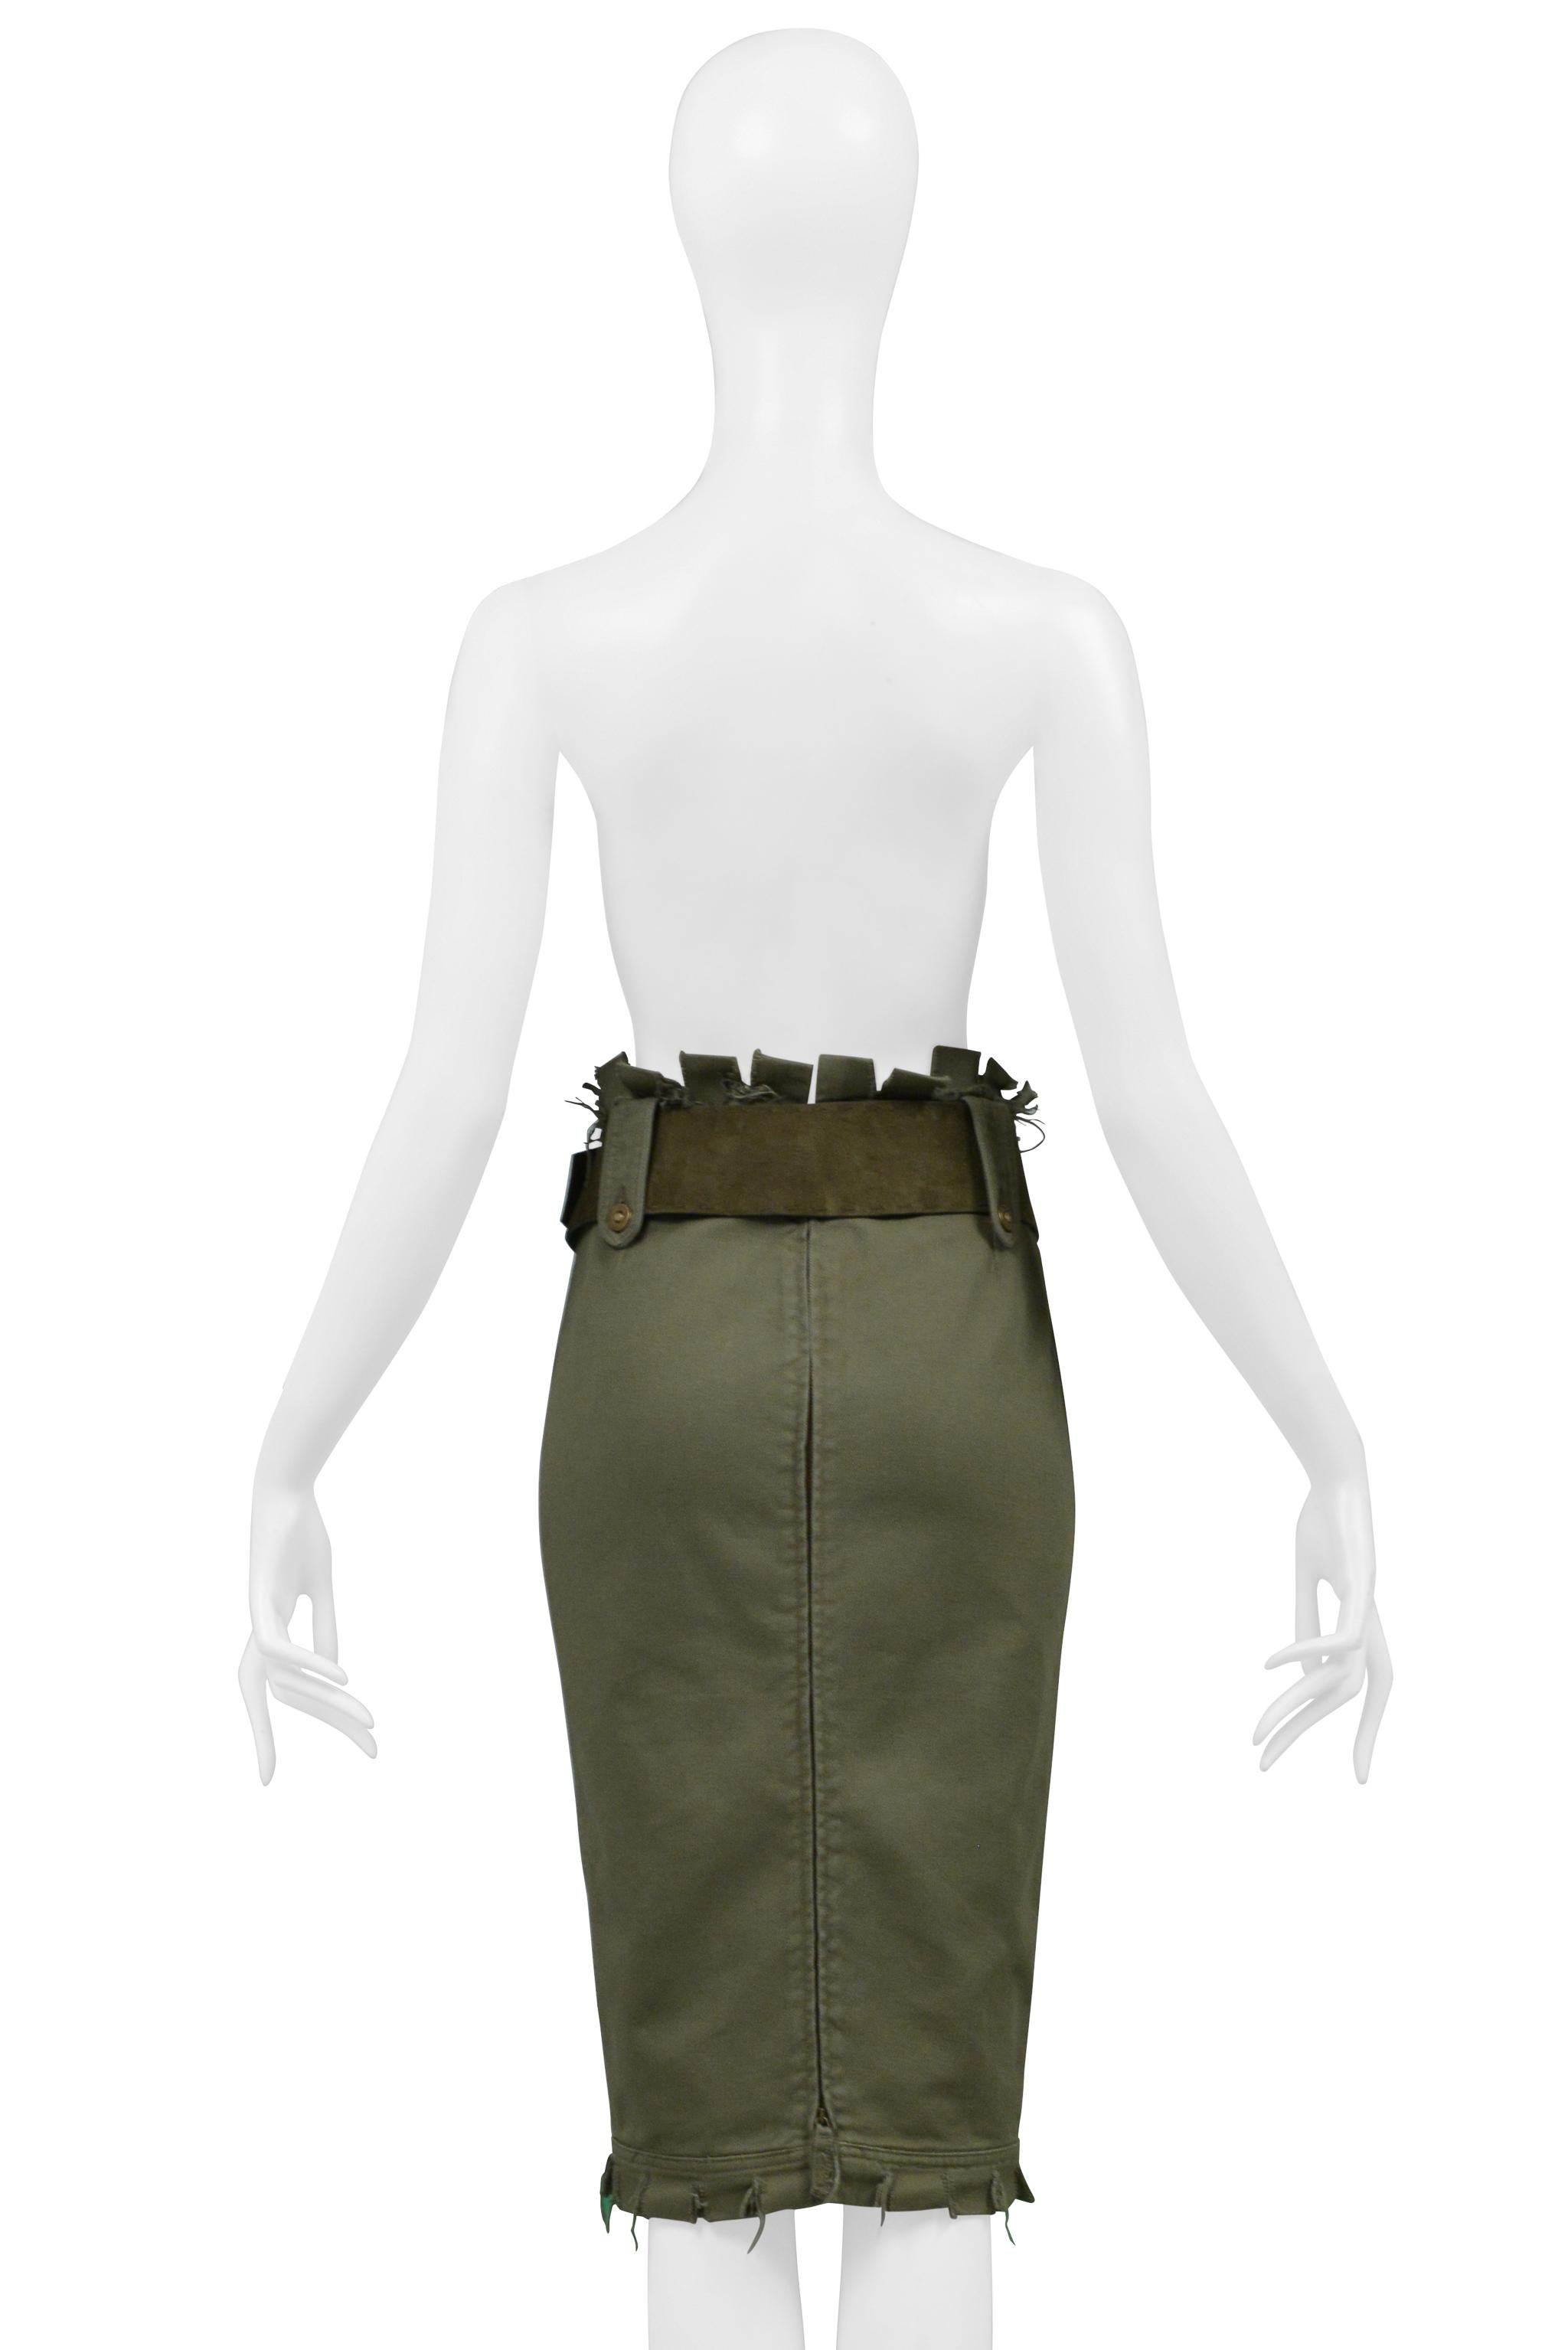 Alexander Mcqueen Olive Frayed Skirt Ss 2003 In Excellent Condition For Sale In Los Angeles, CA